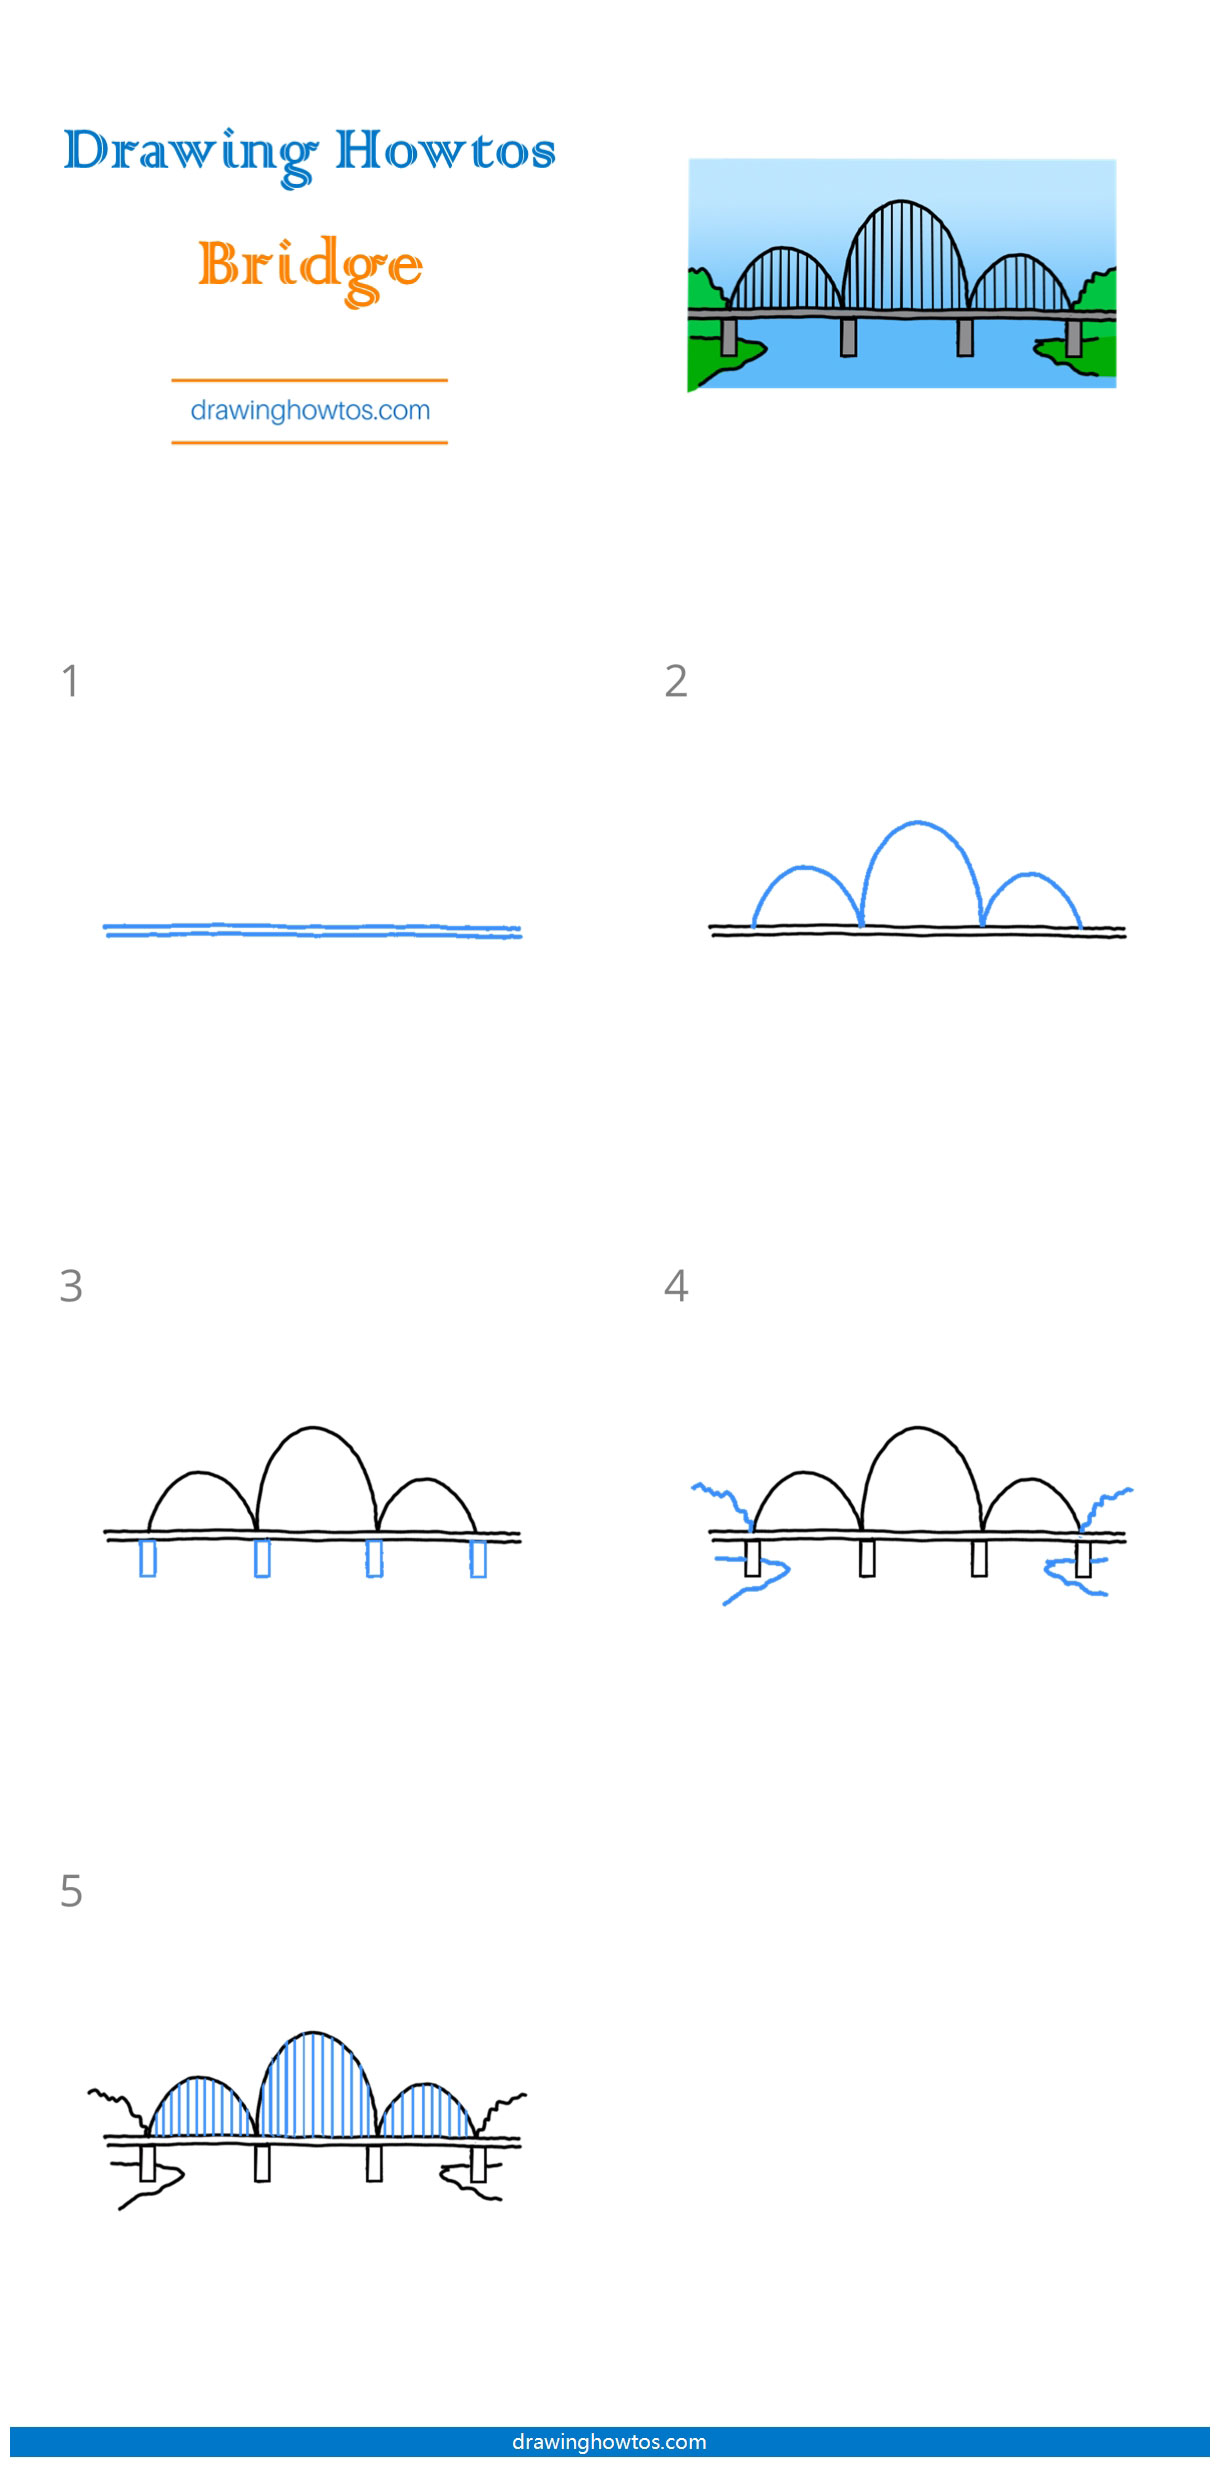 How to Draw a Bridge Step by Step